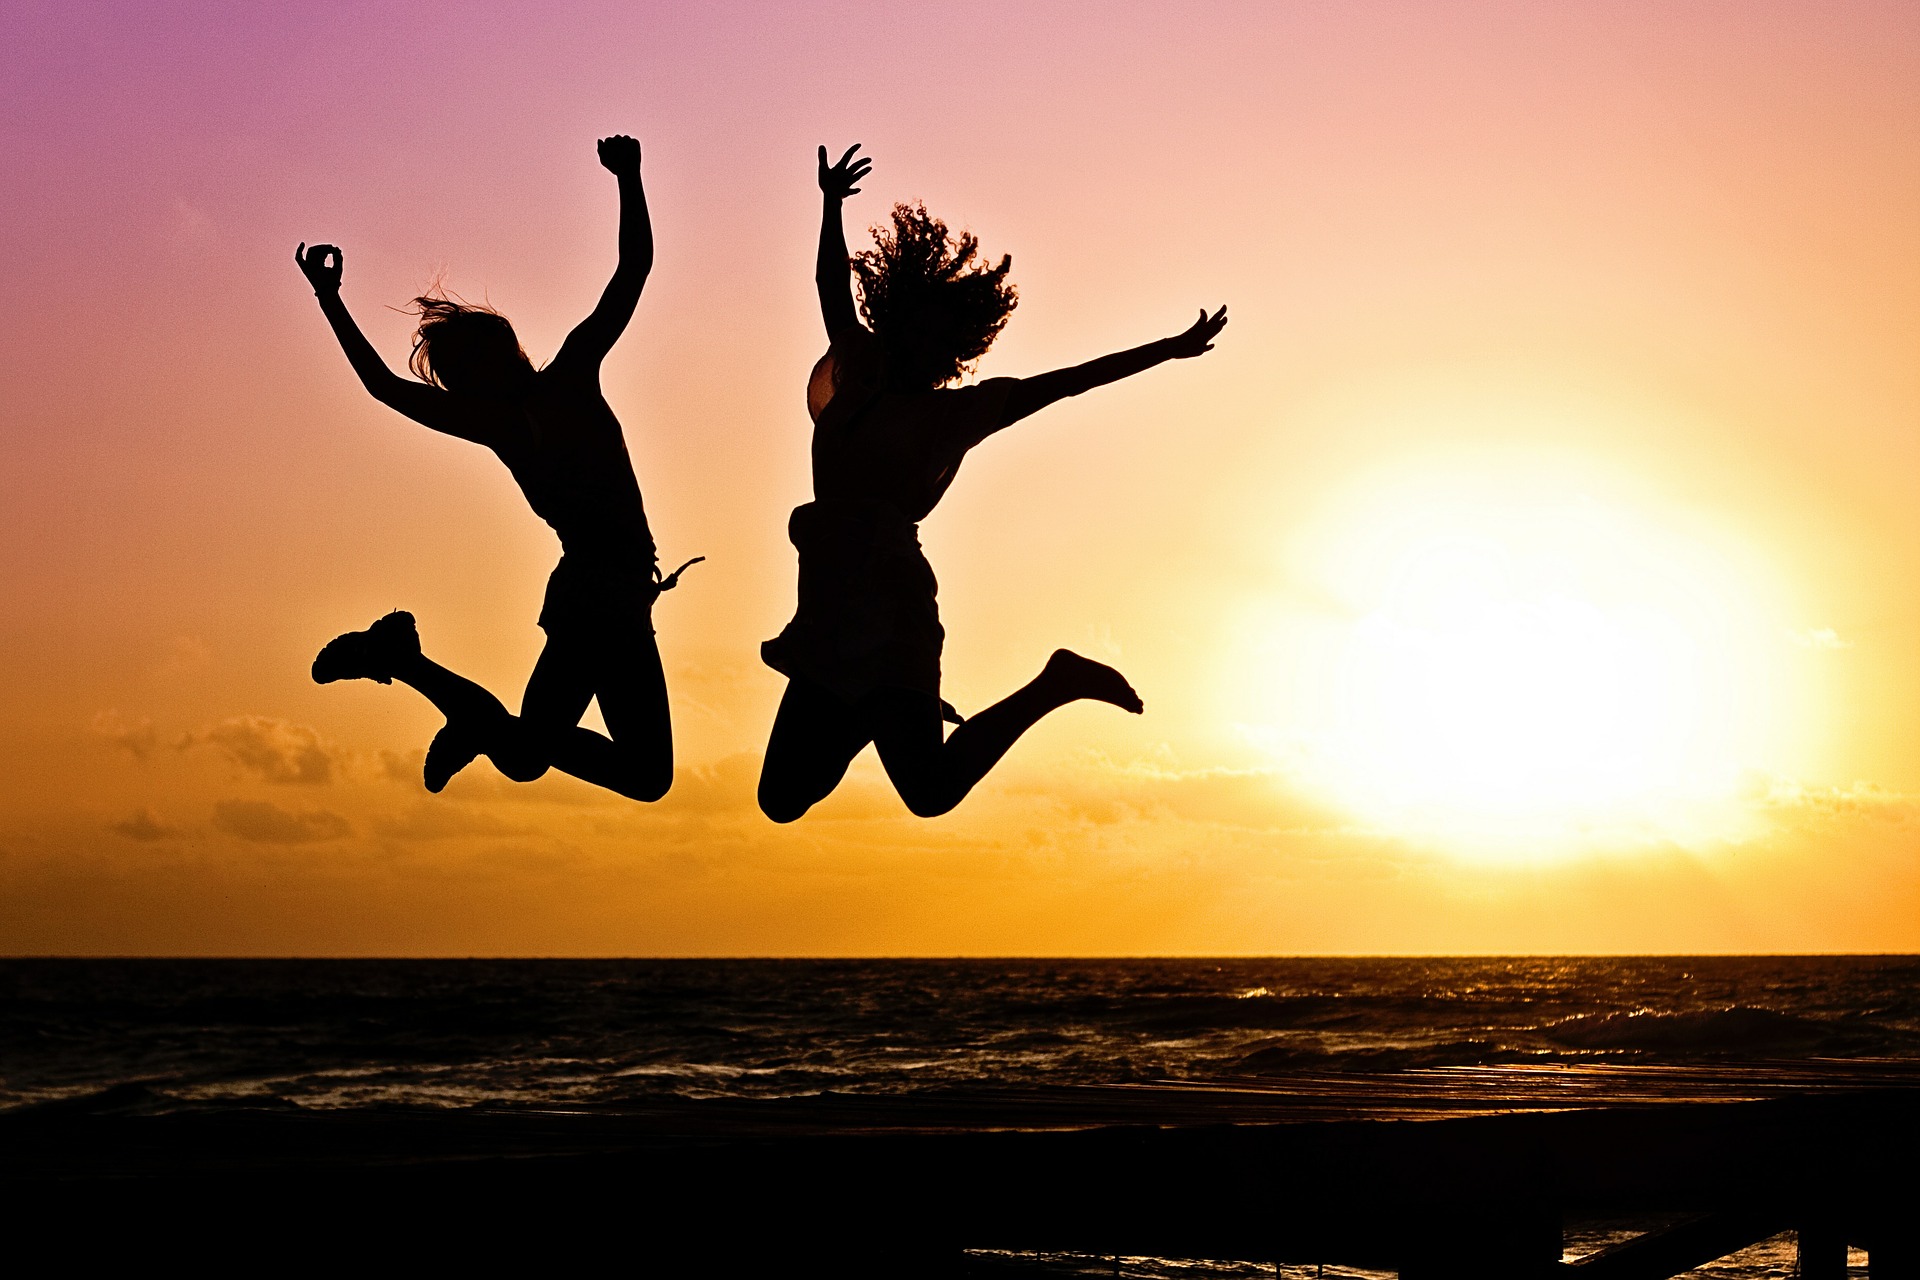 Image: two silhouettes jumping in the air with sunset background